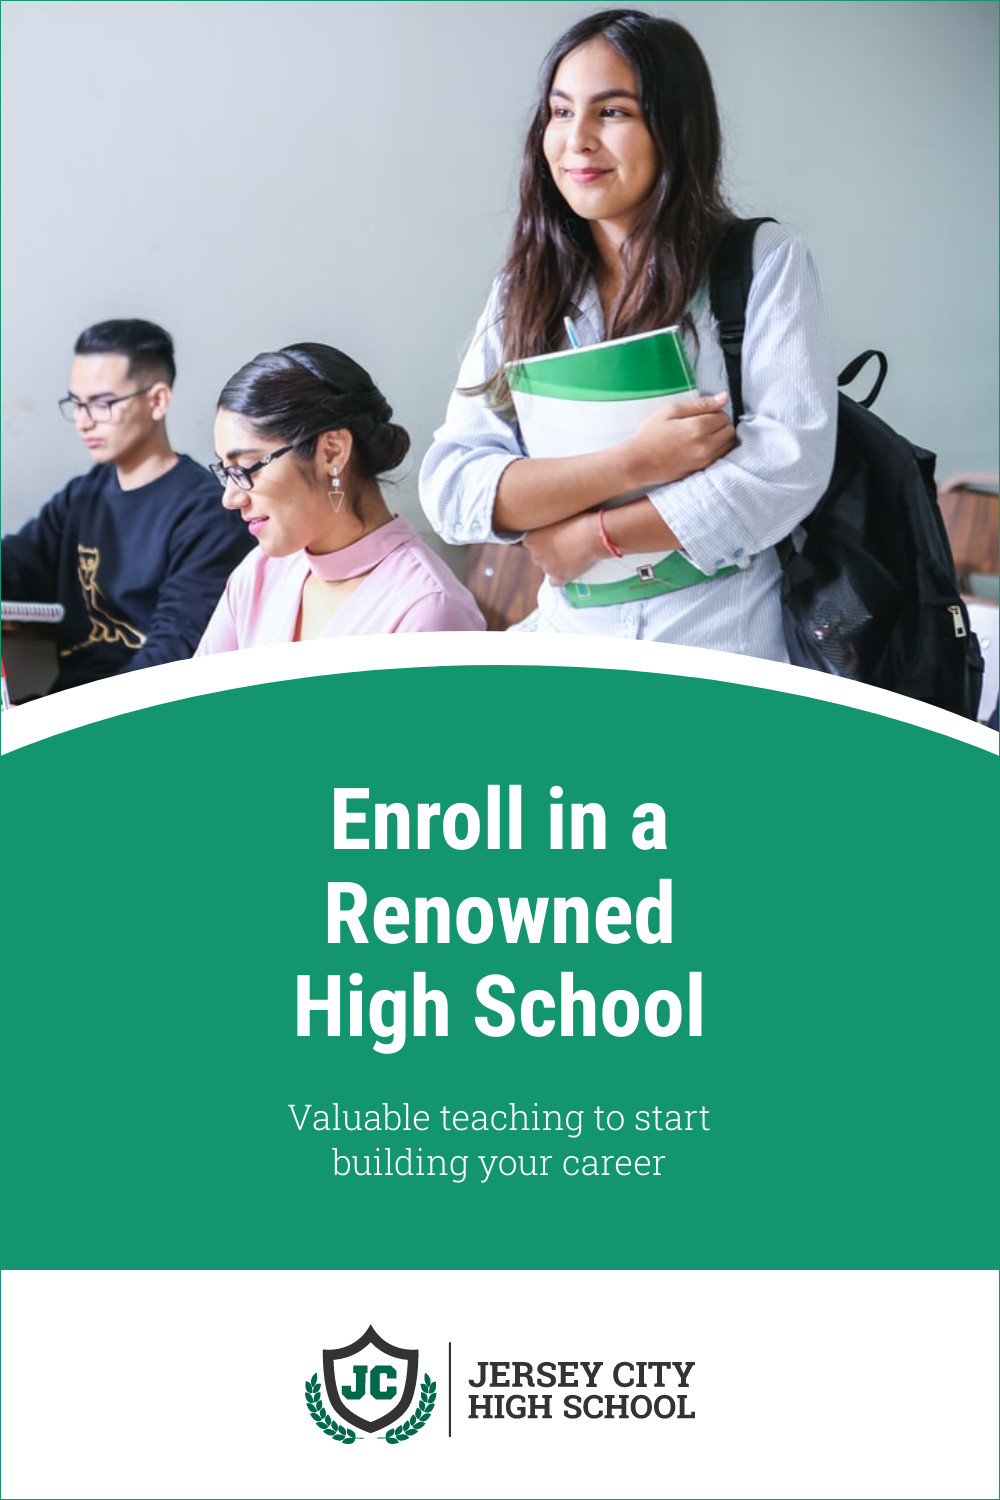 Enroll in a Renowned High School